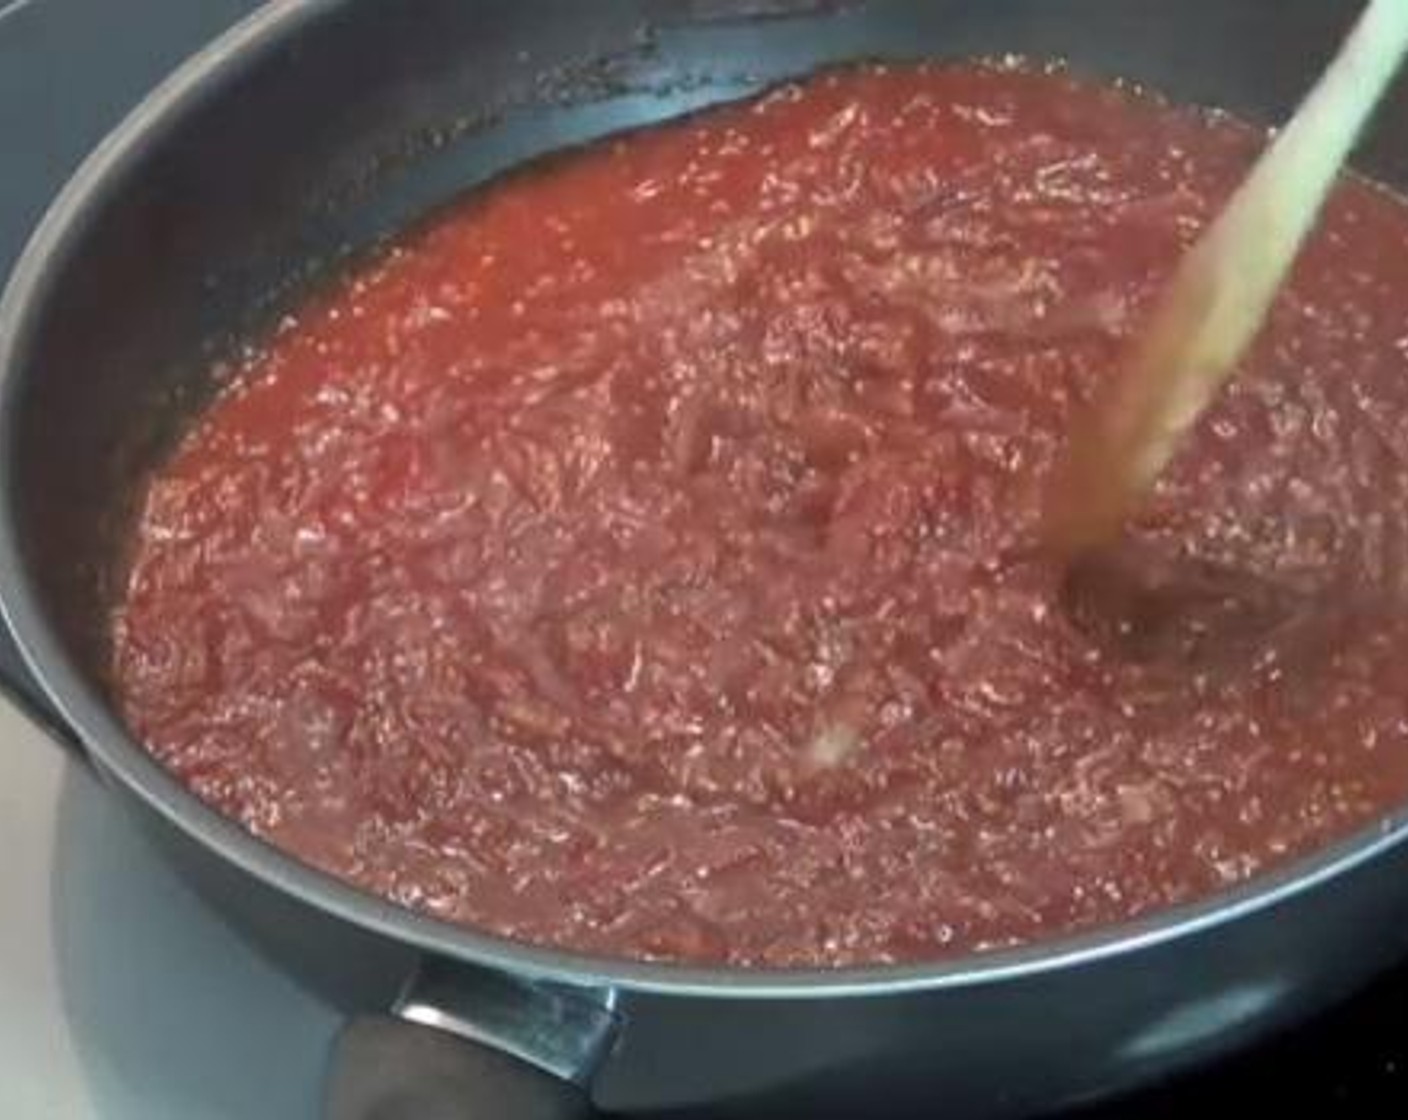 step 3 Bring the sauce to the boil. Reduce the temperature down to low and allow it to simmer for about 20 minutes.